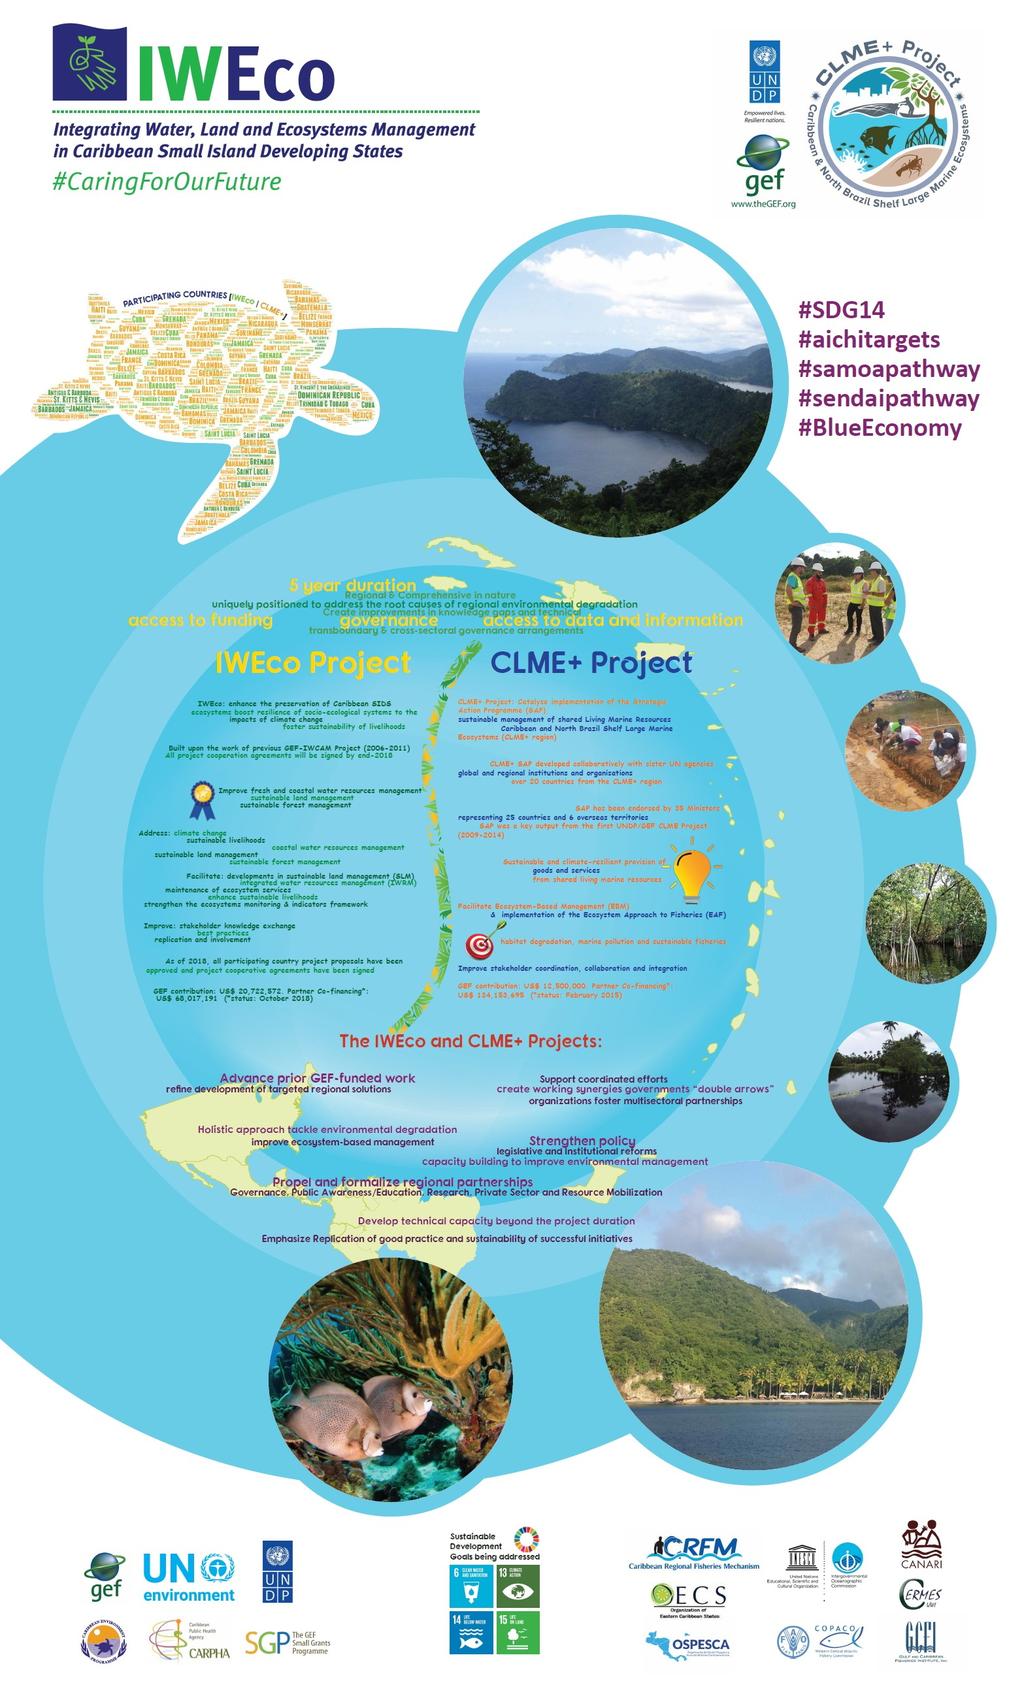 4 < The winning poster of the 9th GEF International Waters Conference (IWC9) which